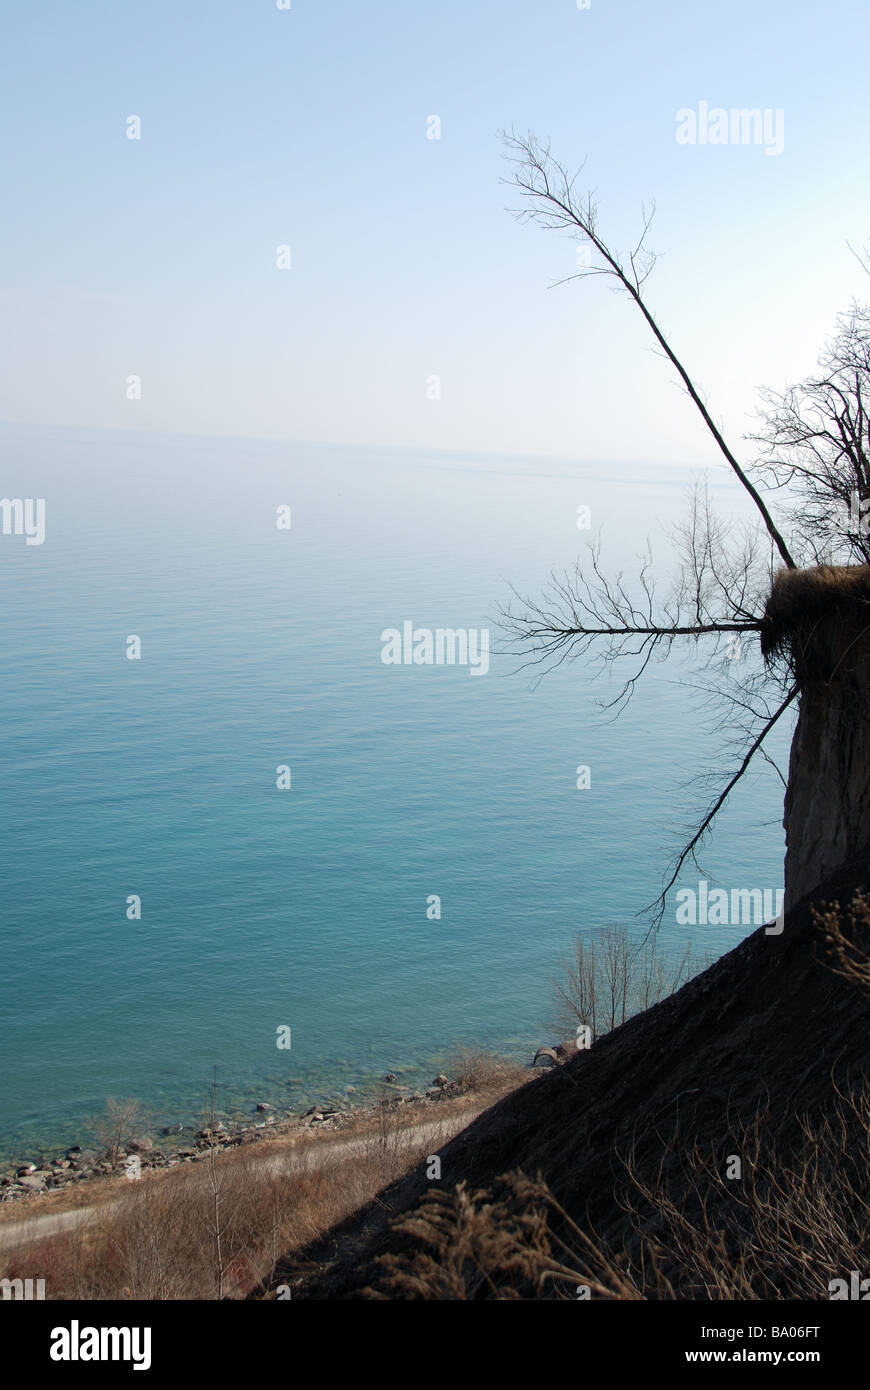 Damaged trees that have fallen victim to erosion leaning over on the side of the Scarborough bluffs in Toronto Ontario Canada Stock Photo